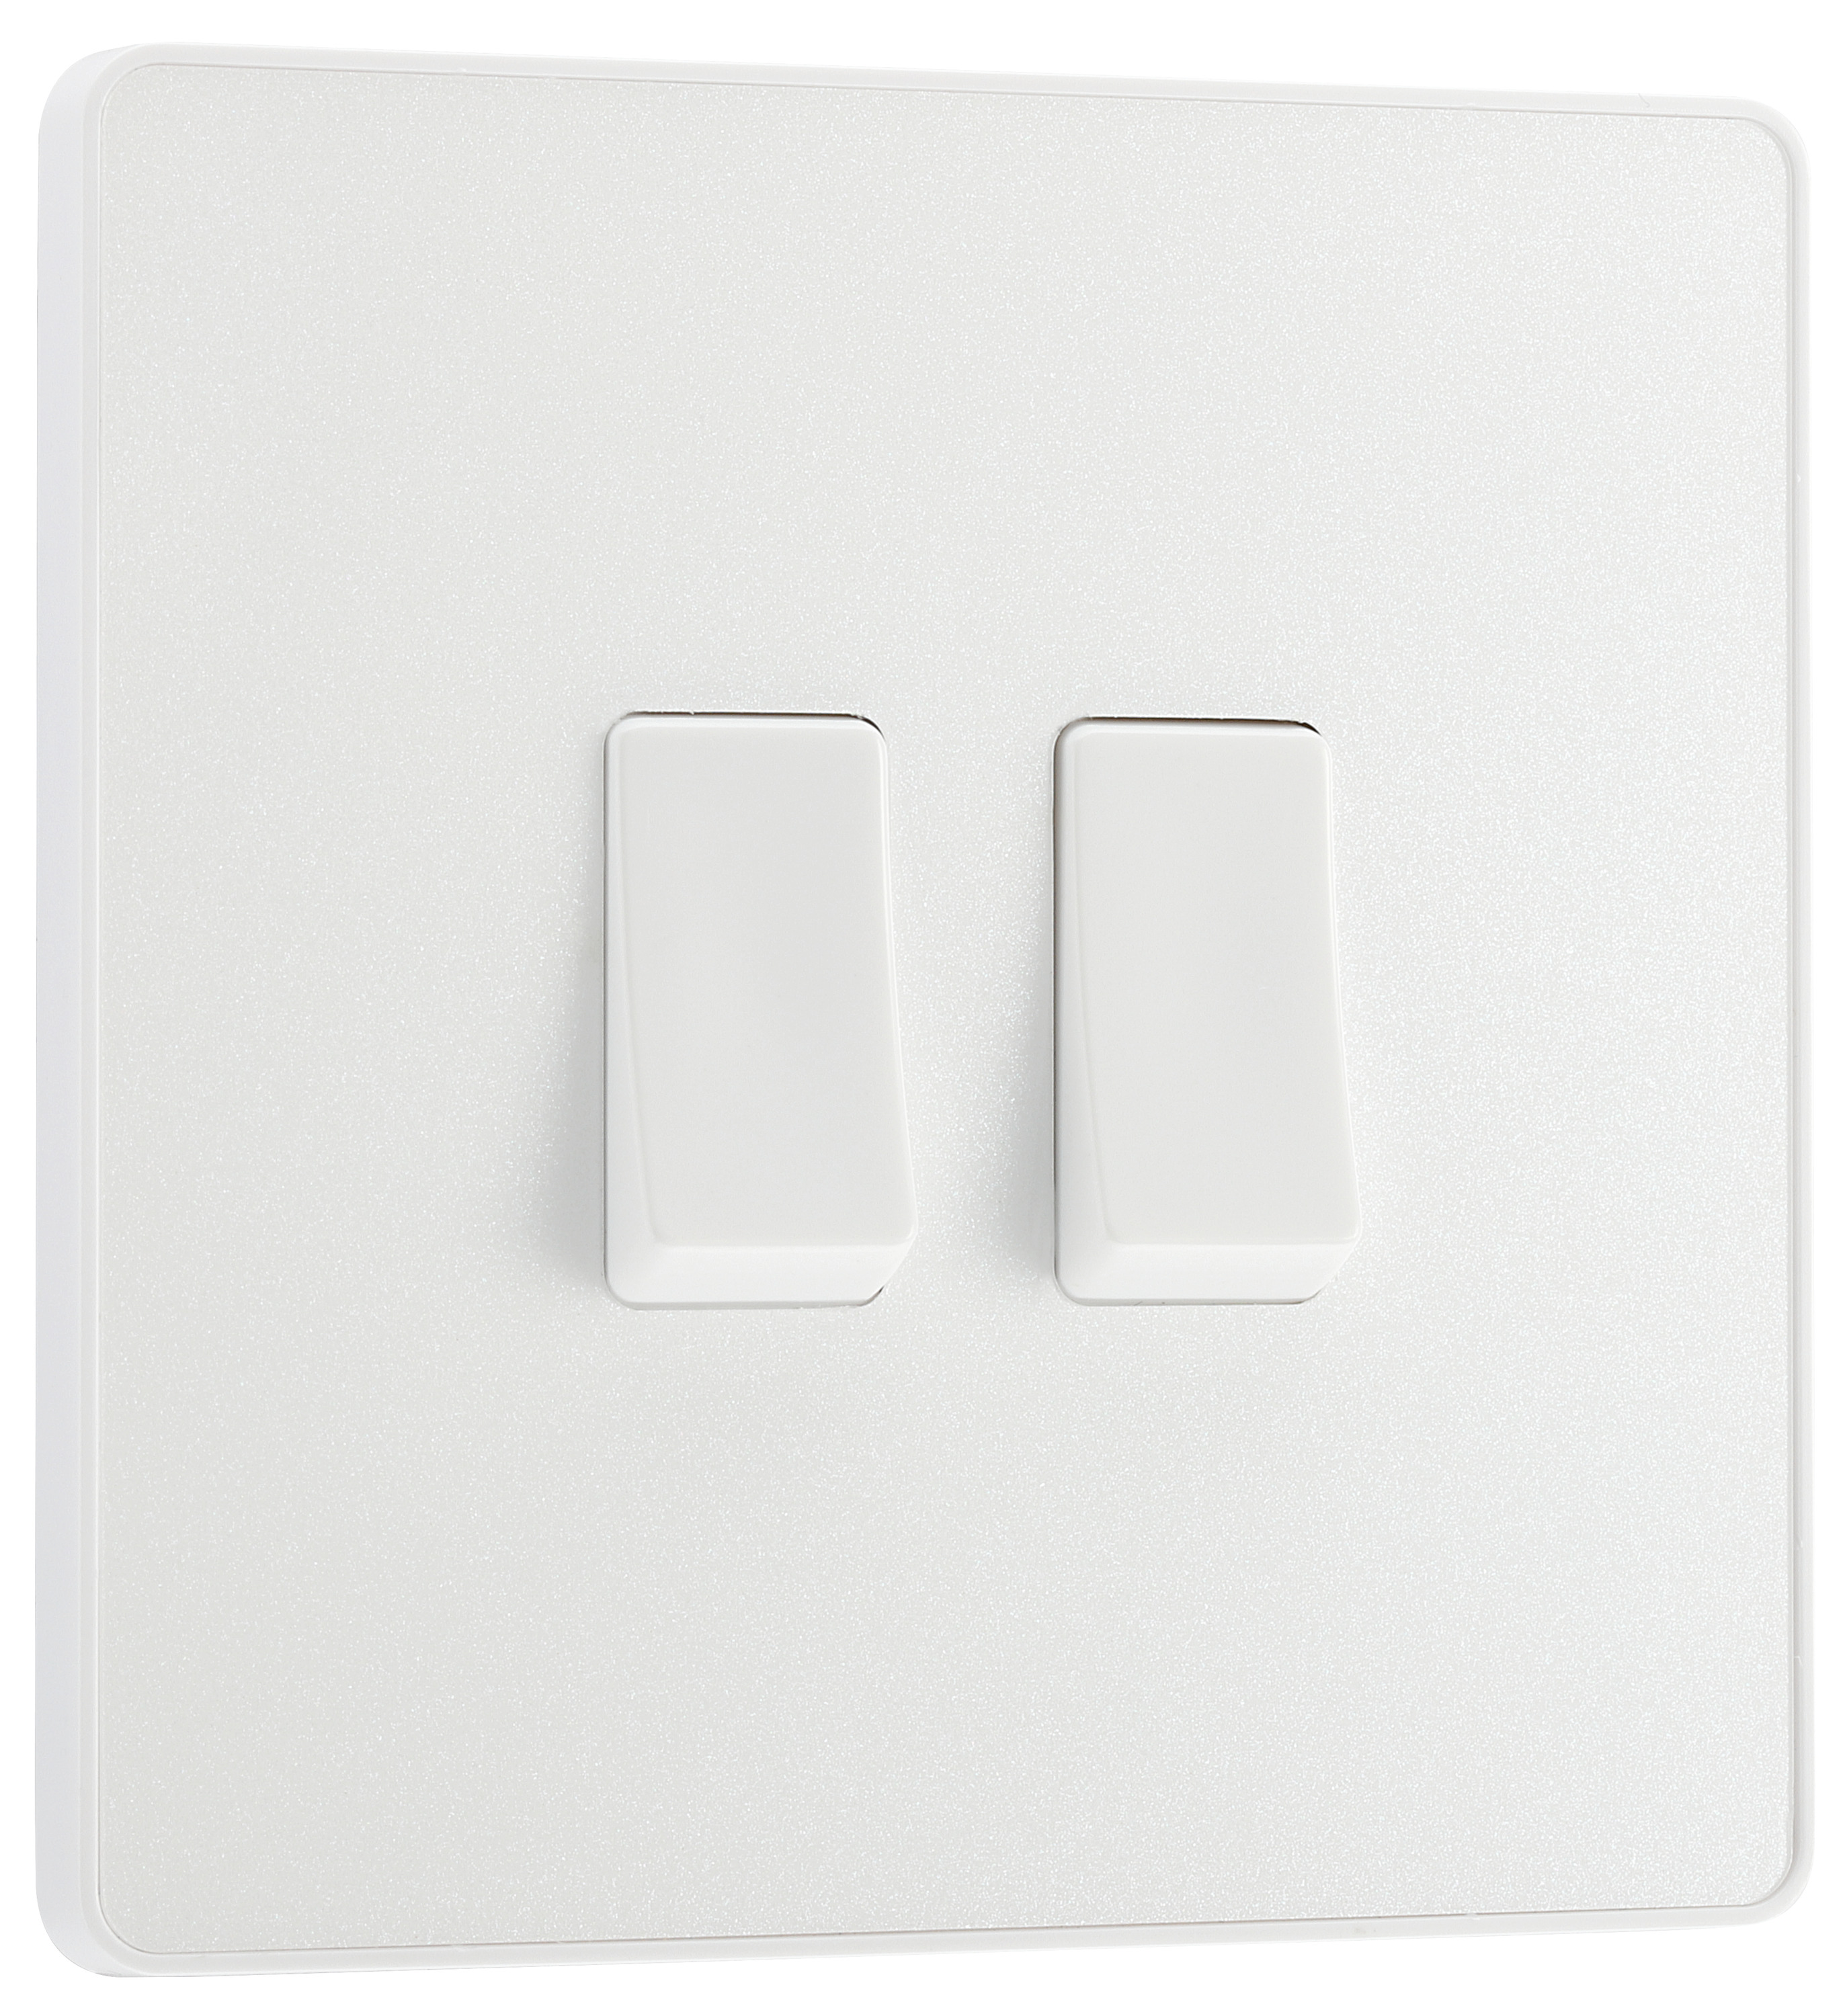 Image of BG Evolve Pearlescent White 20A Double Switch - 2 Way